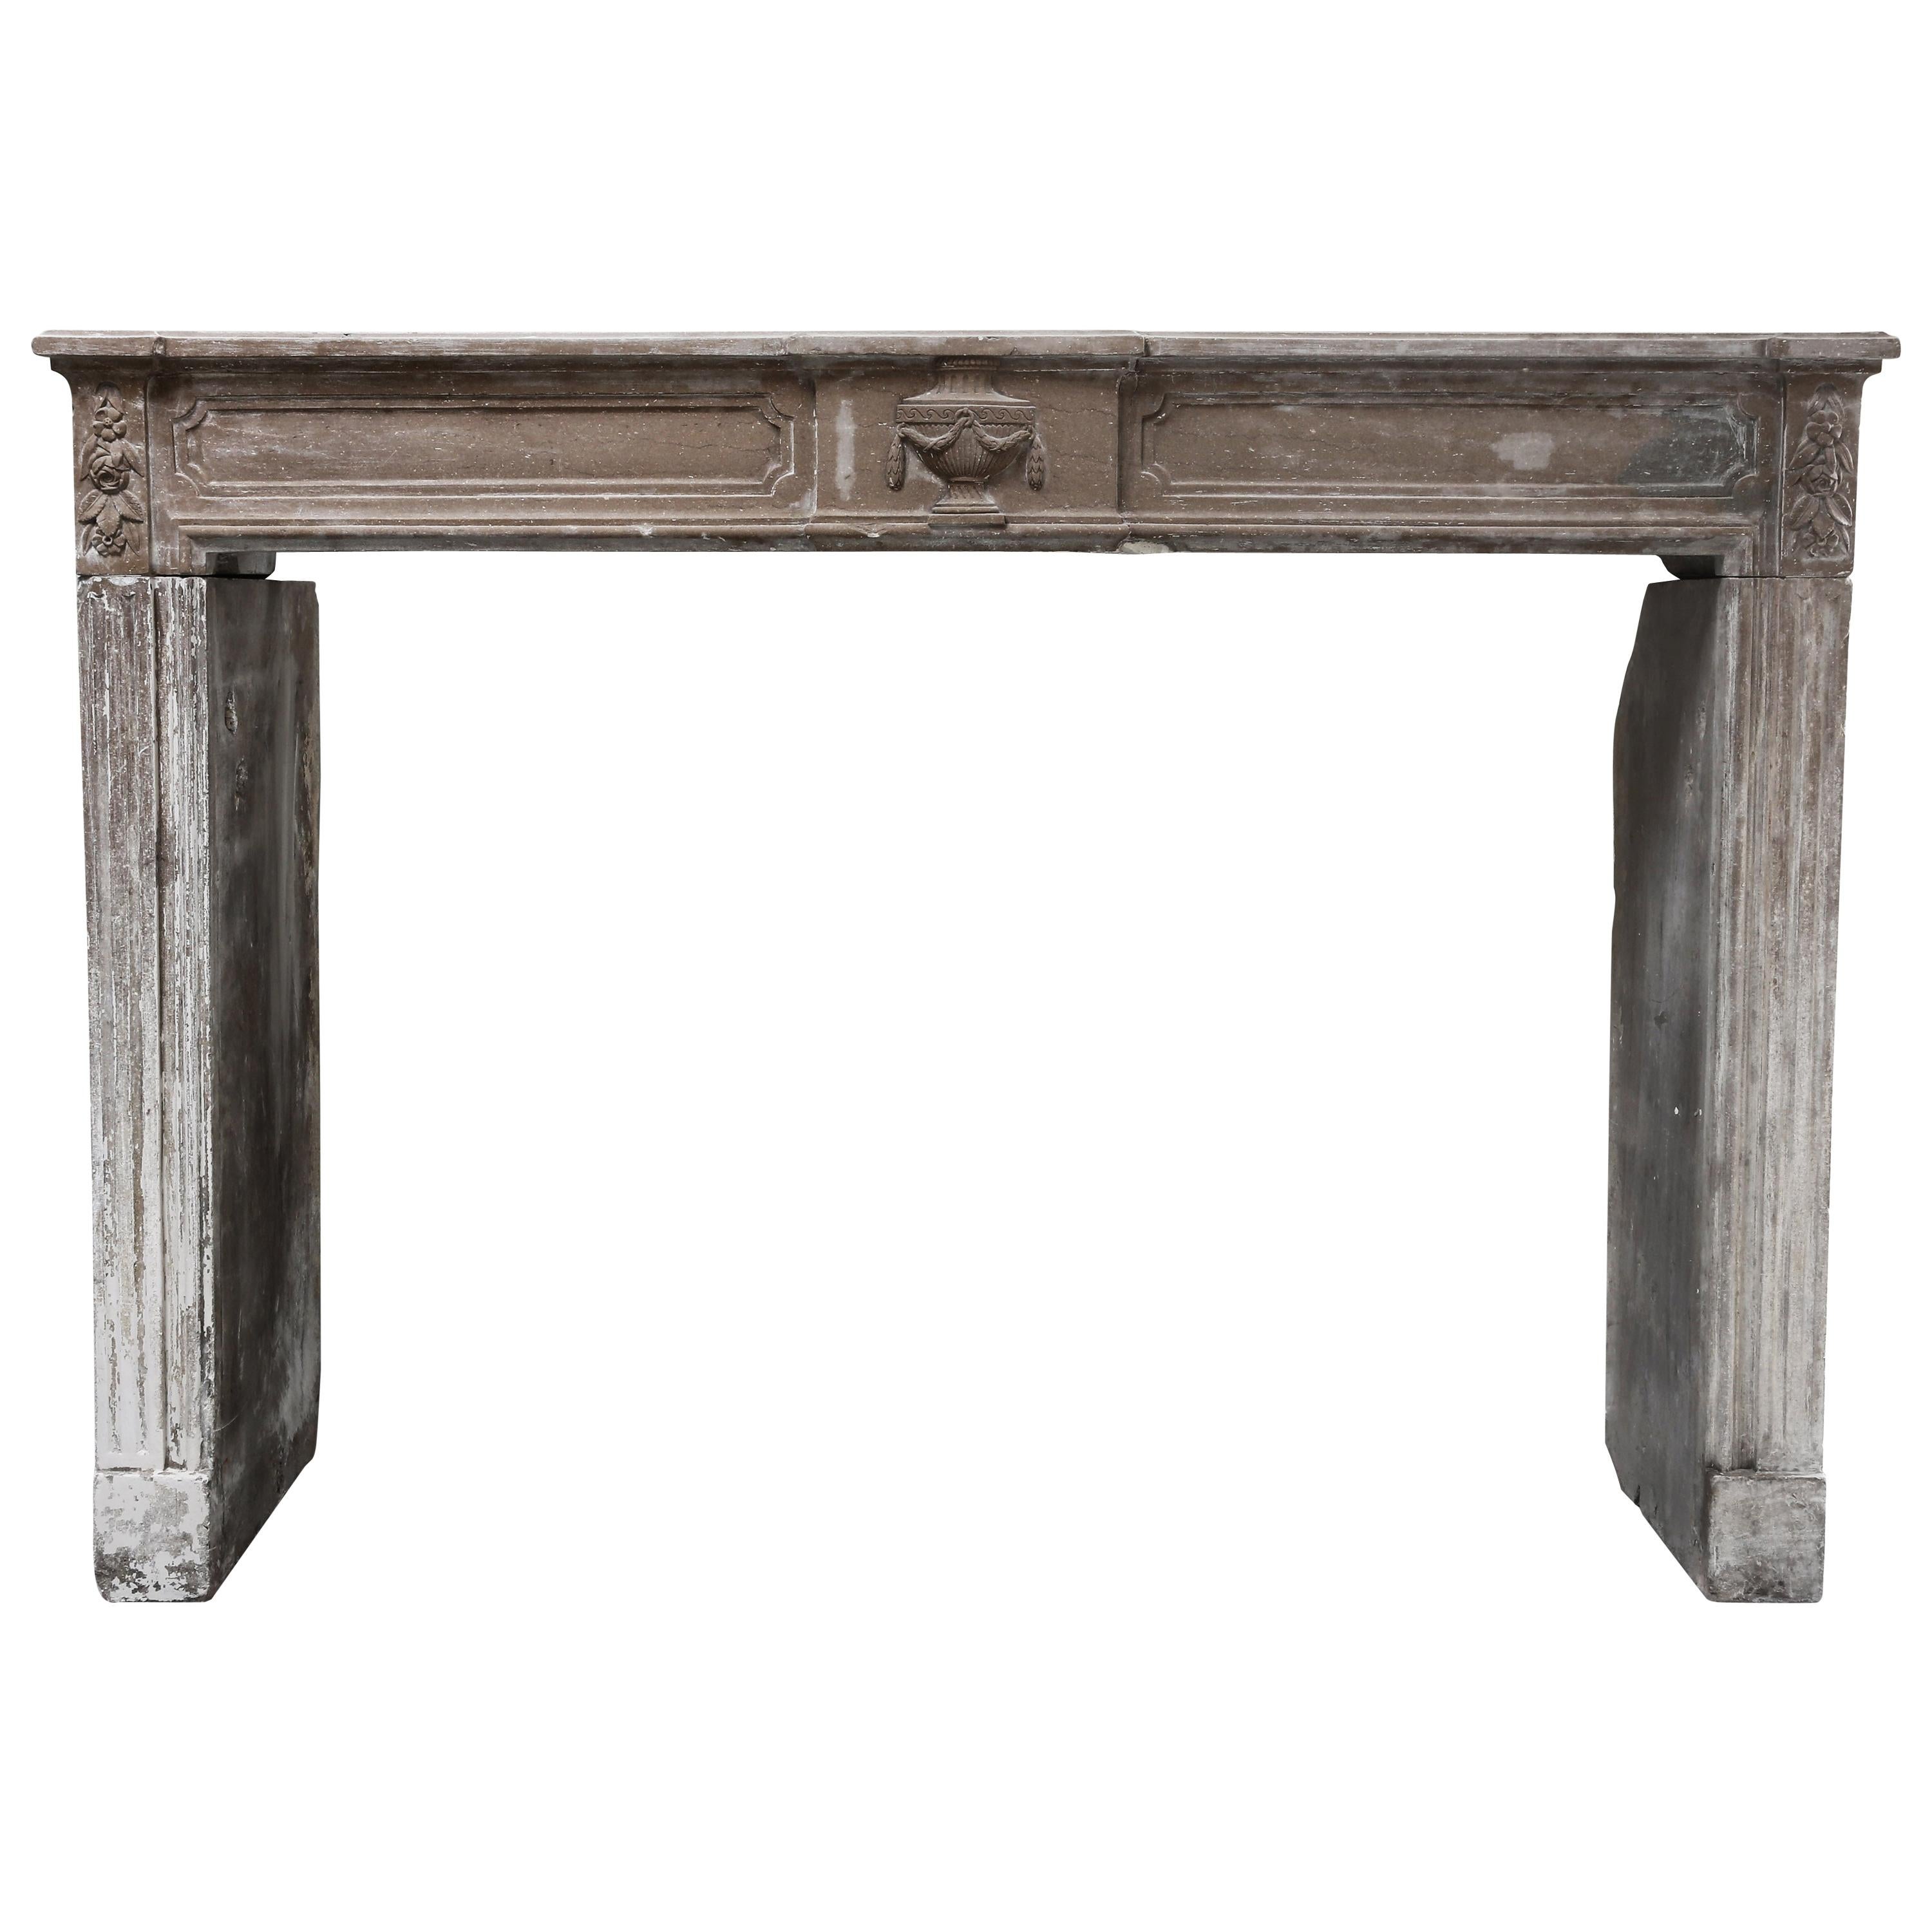 19th Century Antique Fireplace of French Marble Stone